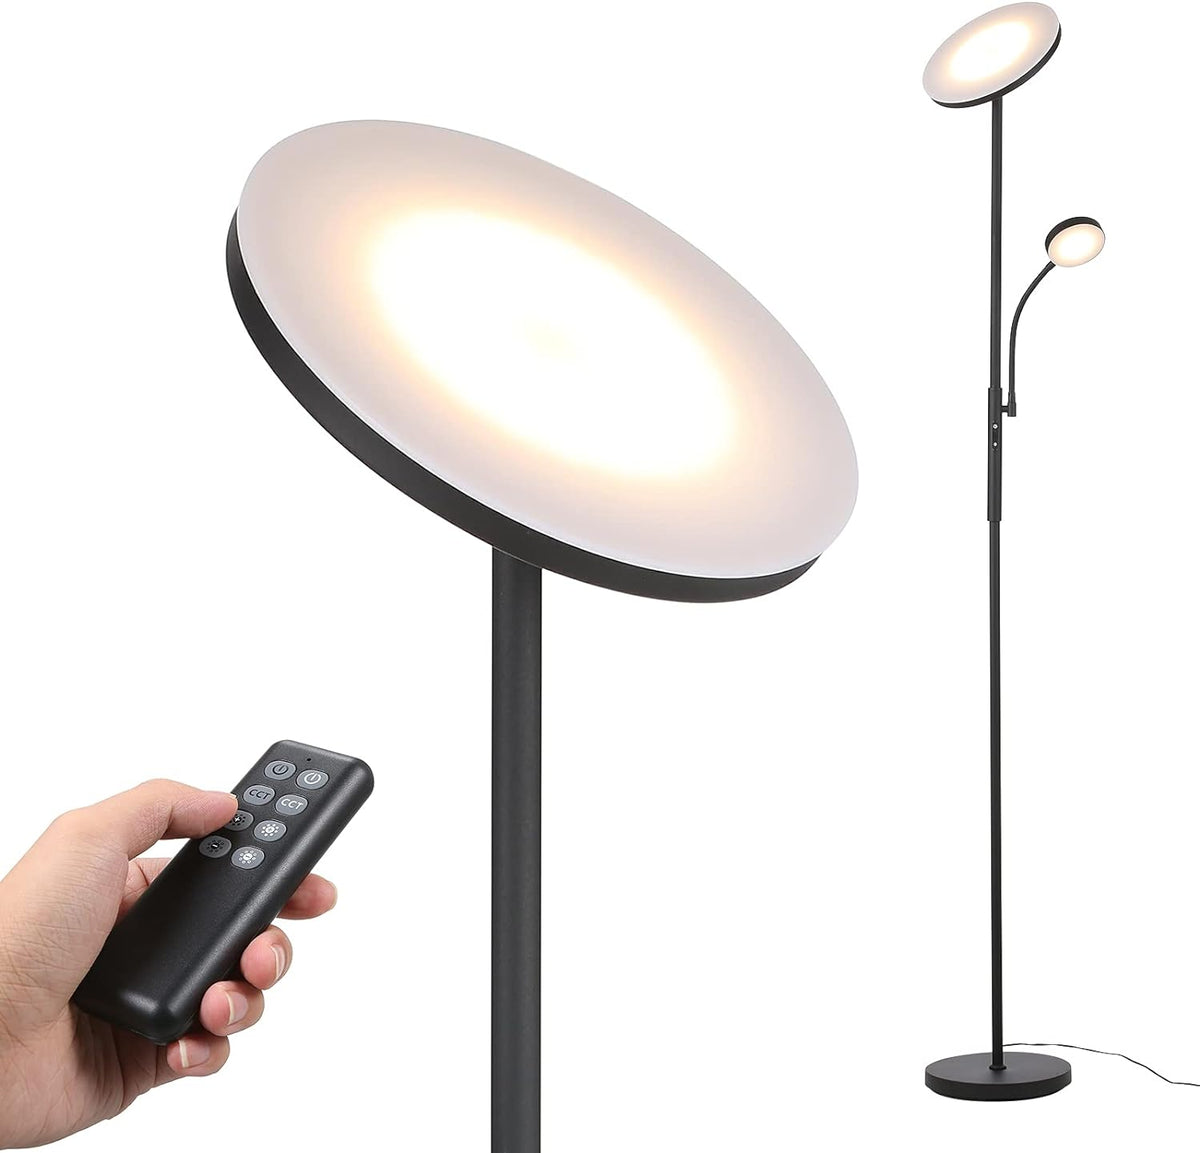 Led Uplighter Floor Lamps Dimmable Rotatable 2 Lights for Living Room with Remote 4 Color Temperatures Standing Lamp 27W Main 7W Side Reading Lamp